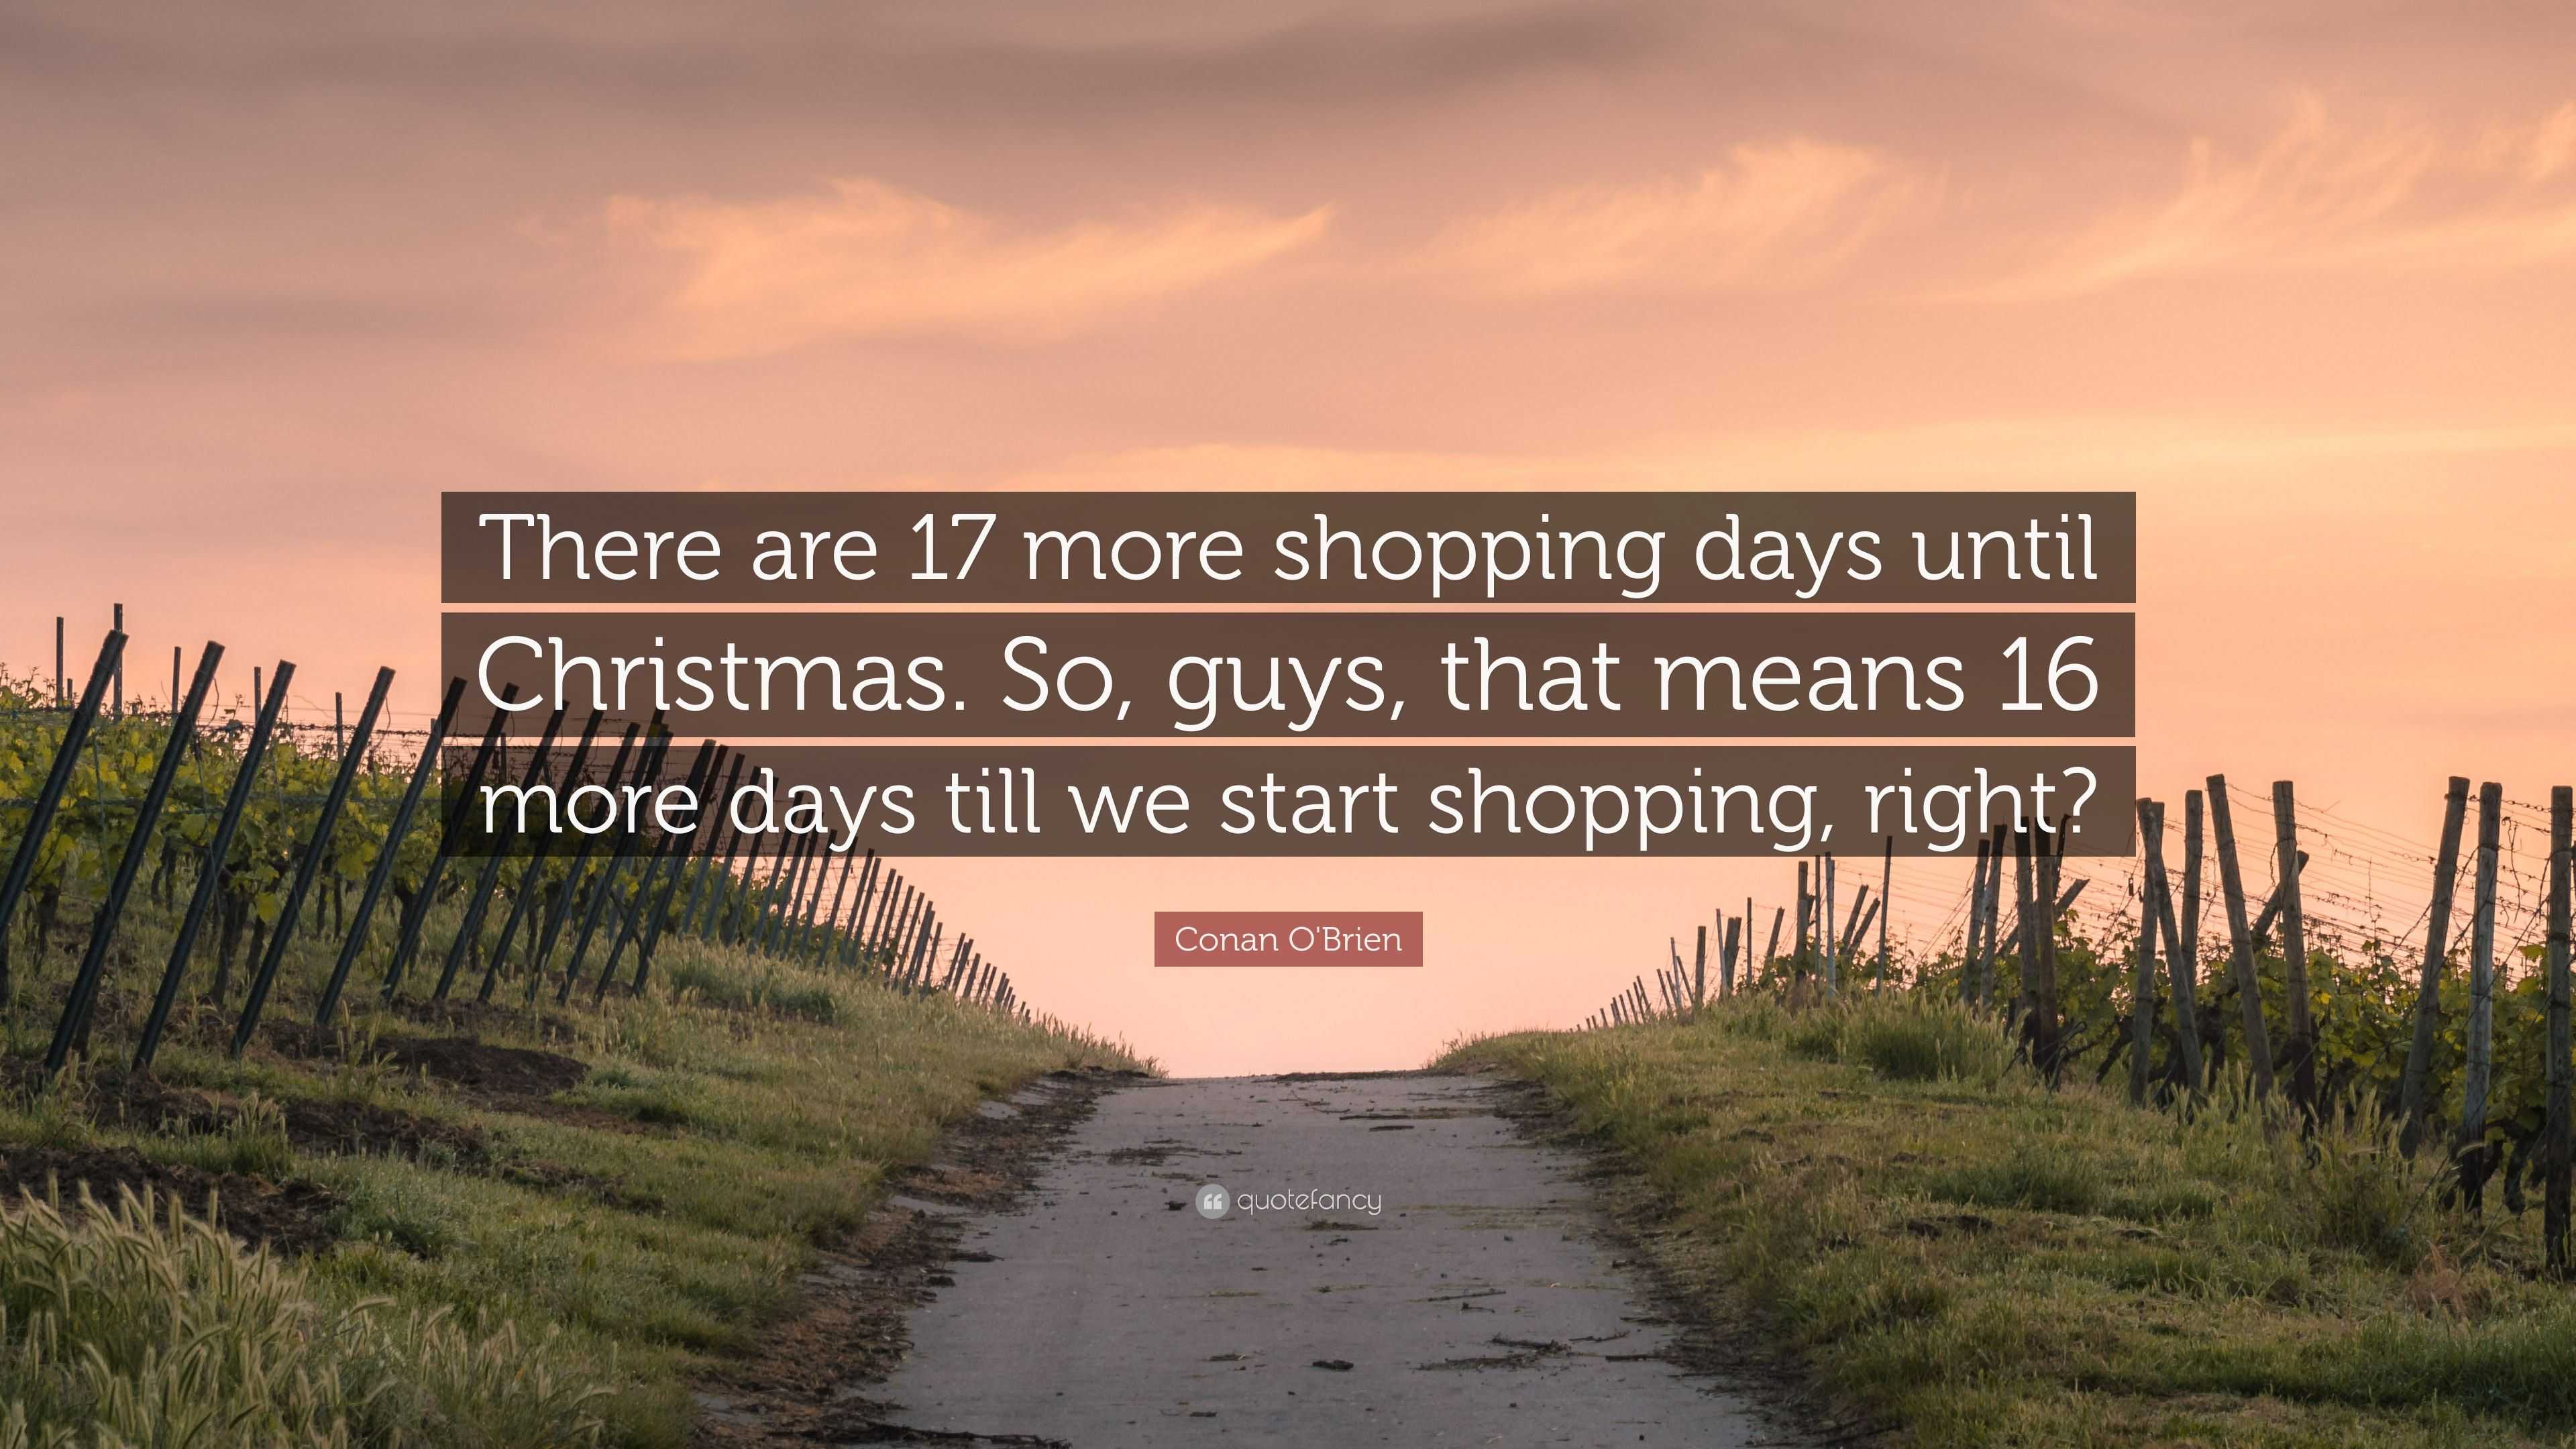 Conan O'Brien Quote “There are 17 more shopping days until Christmas